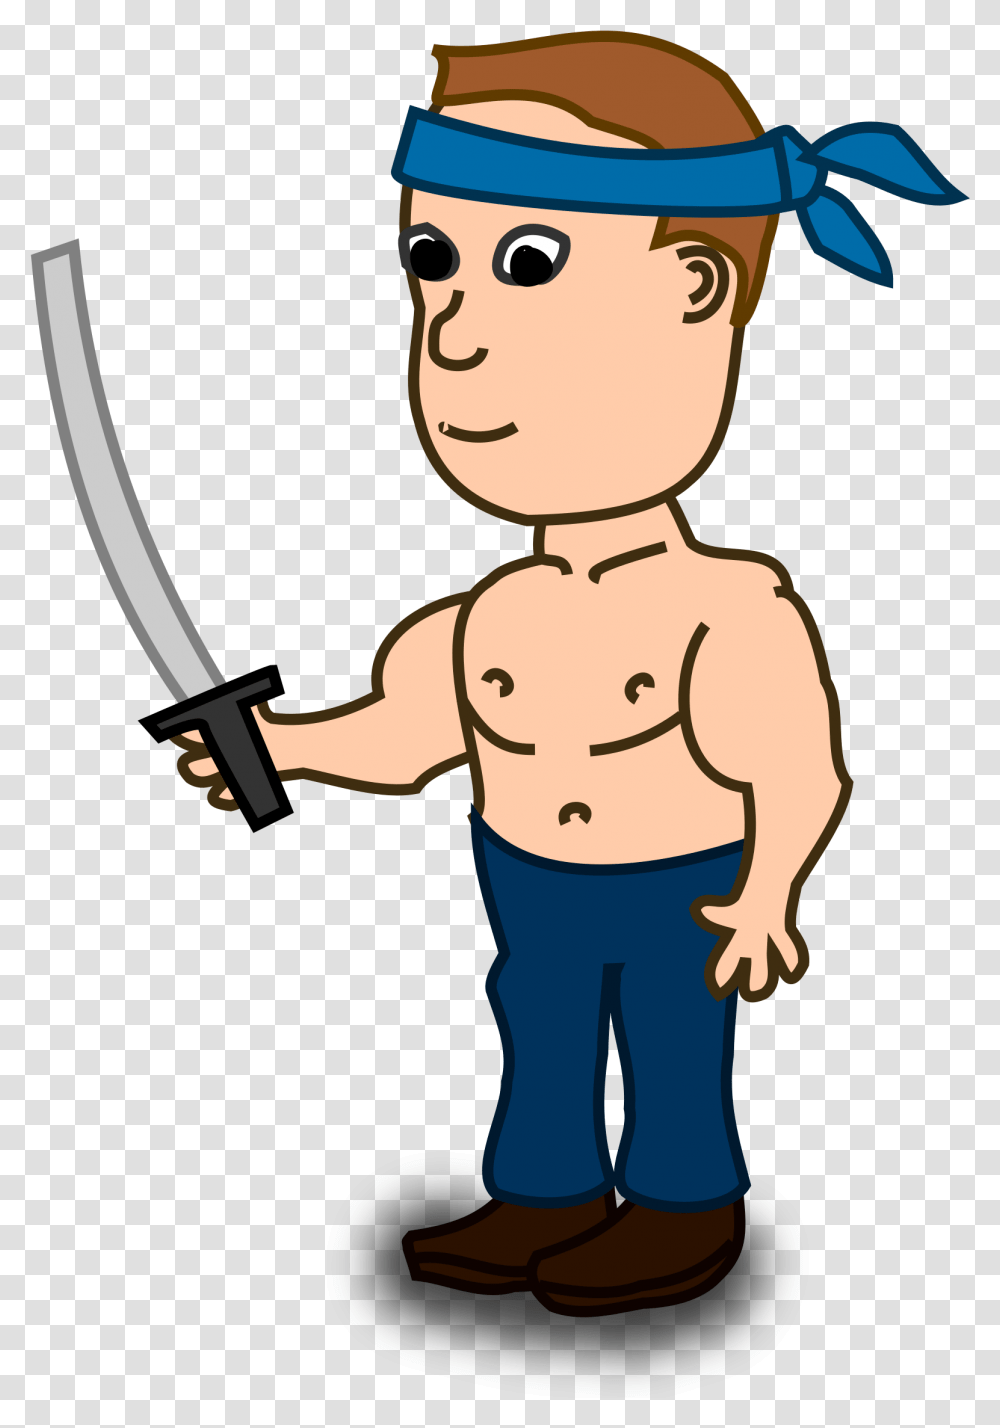 Clipart Sword Comic Cartoon Character With A Sword, Weapon, Weaponry, Performer, Blade Transparent Png